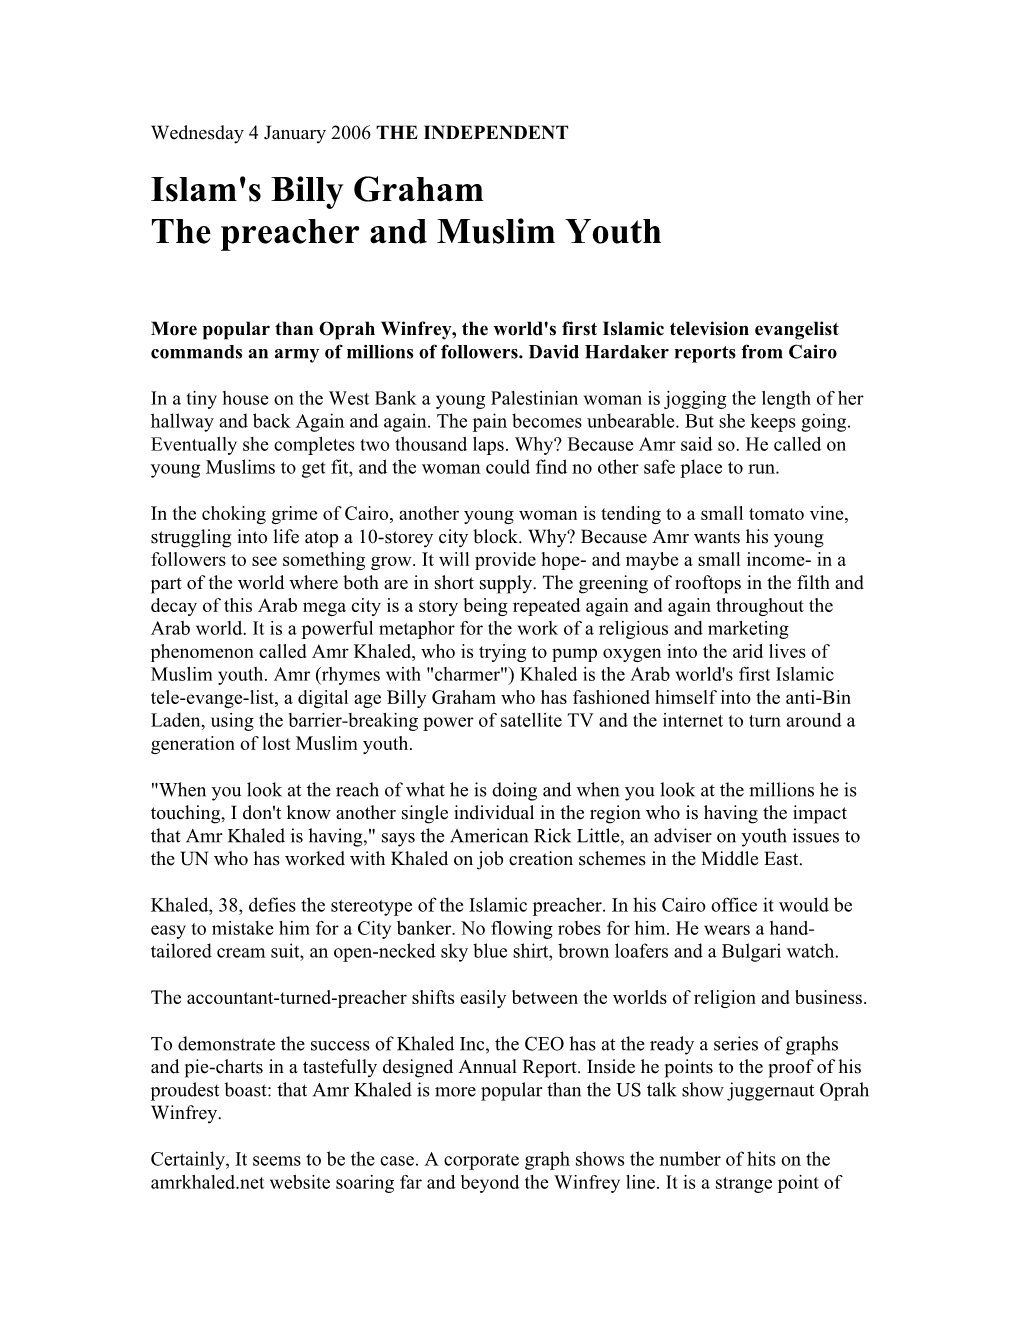 Islam's Billy Graham the Preacher and Muslim Youth [PDF]